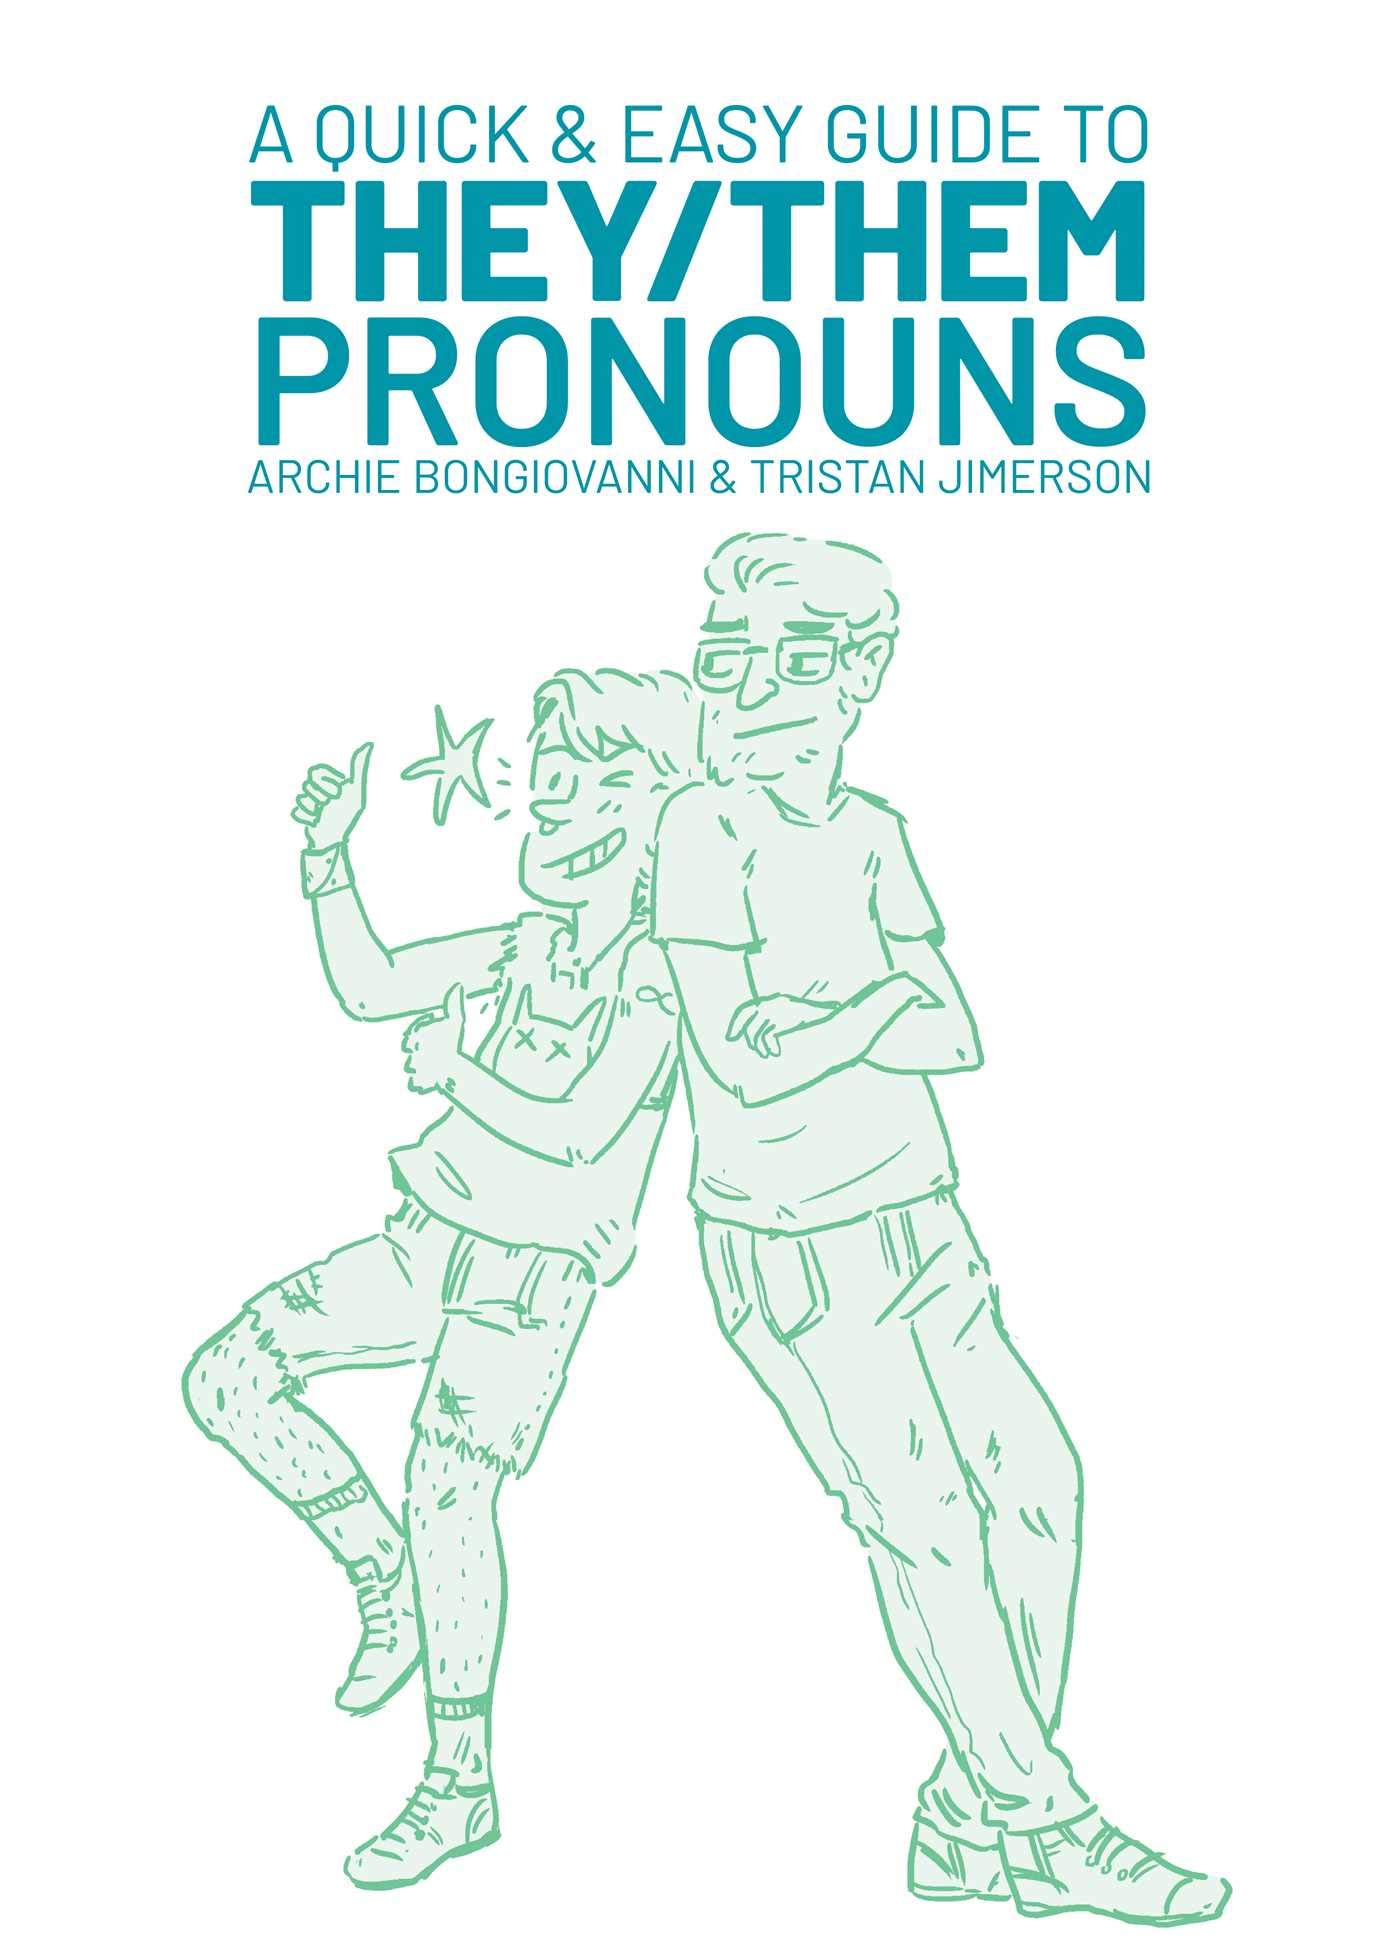 50 queer comics: A Quick & Easy Guide to They/Them Pronouns